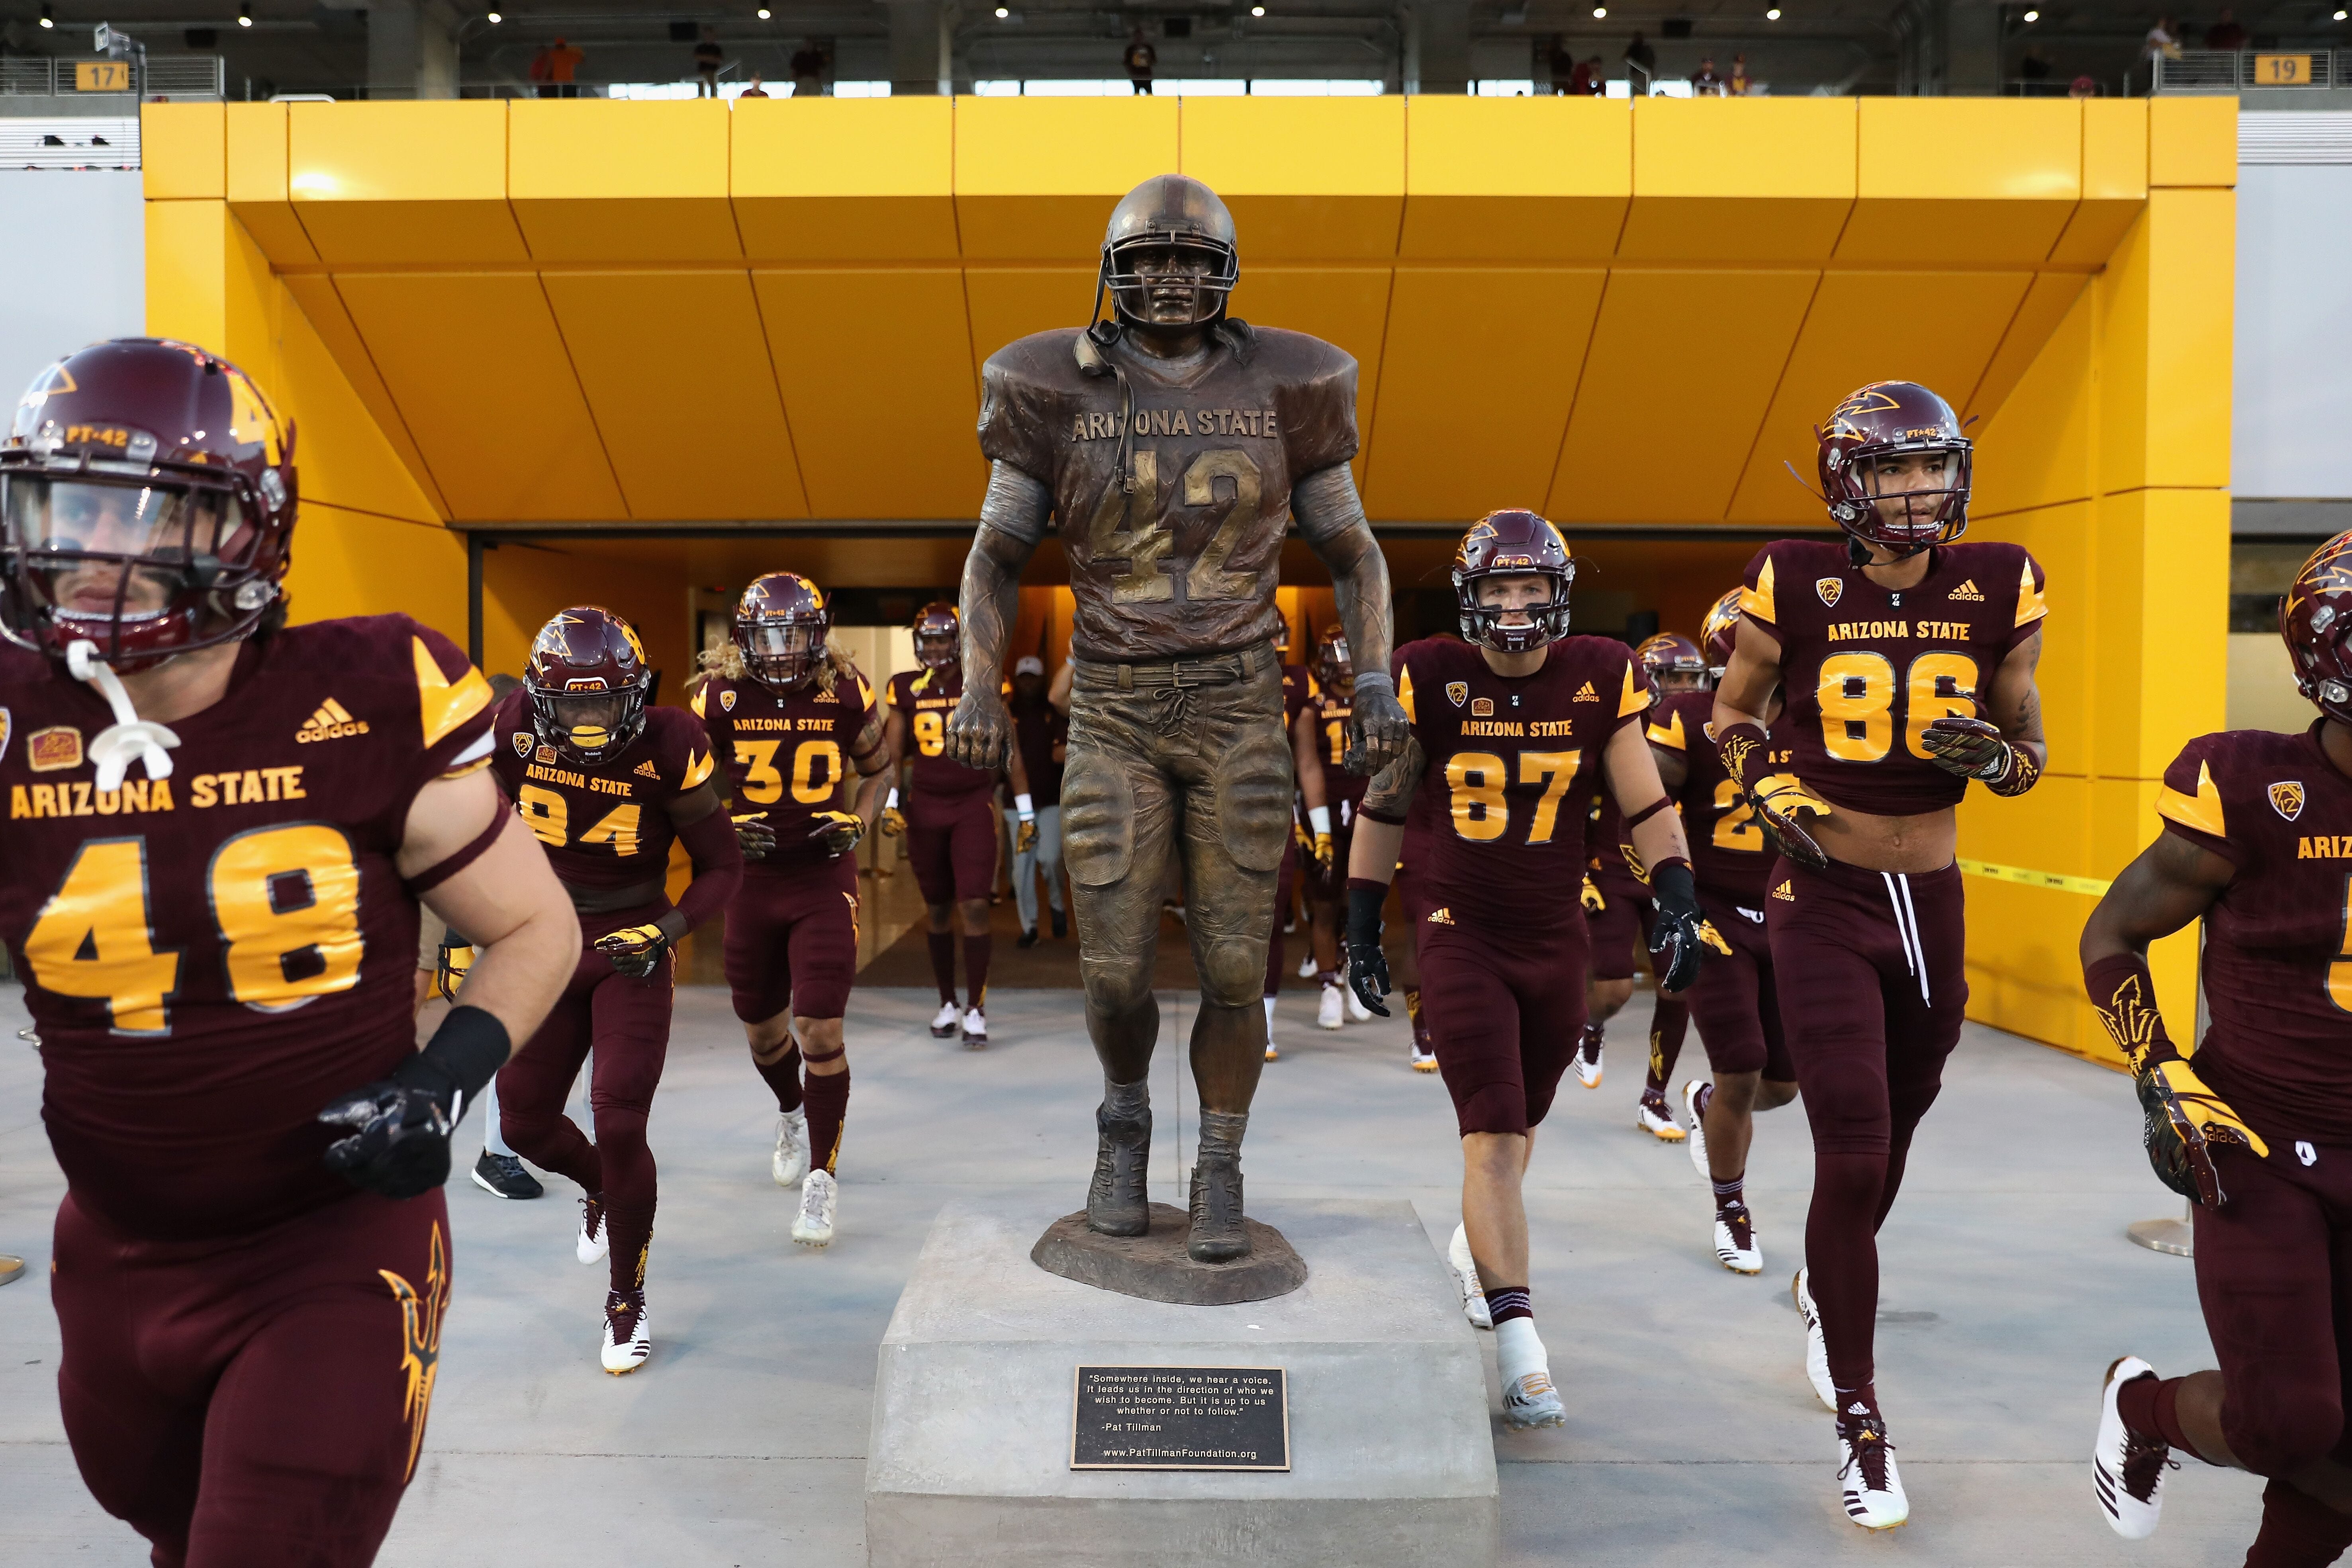 Remembering Pat Tillman: An American Patriot, NFL Player, and Army